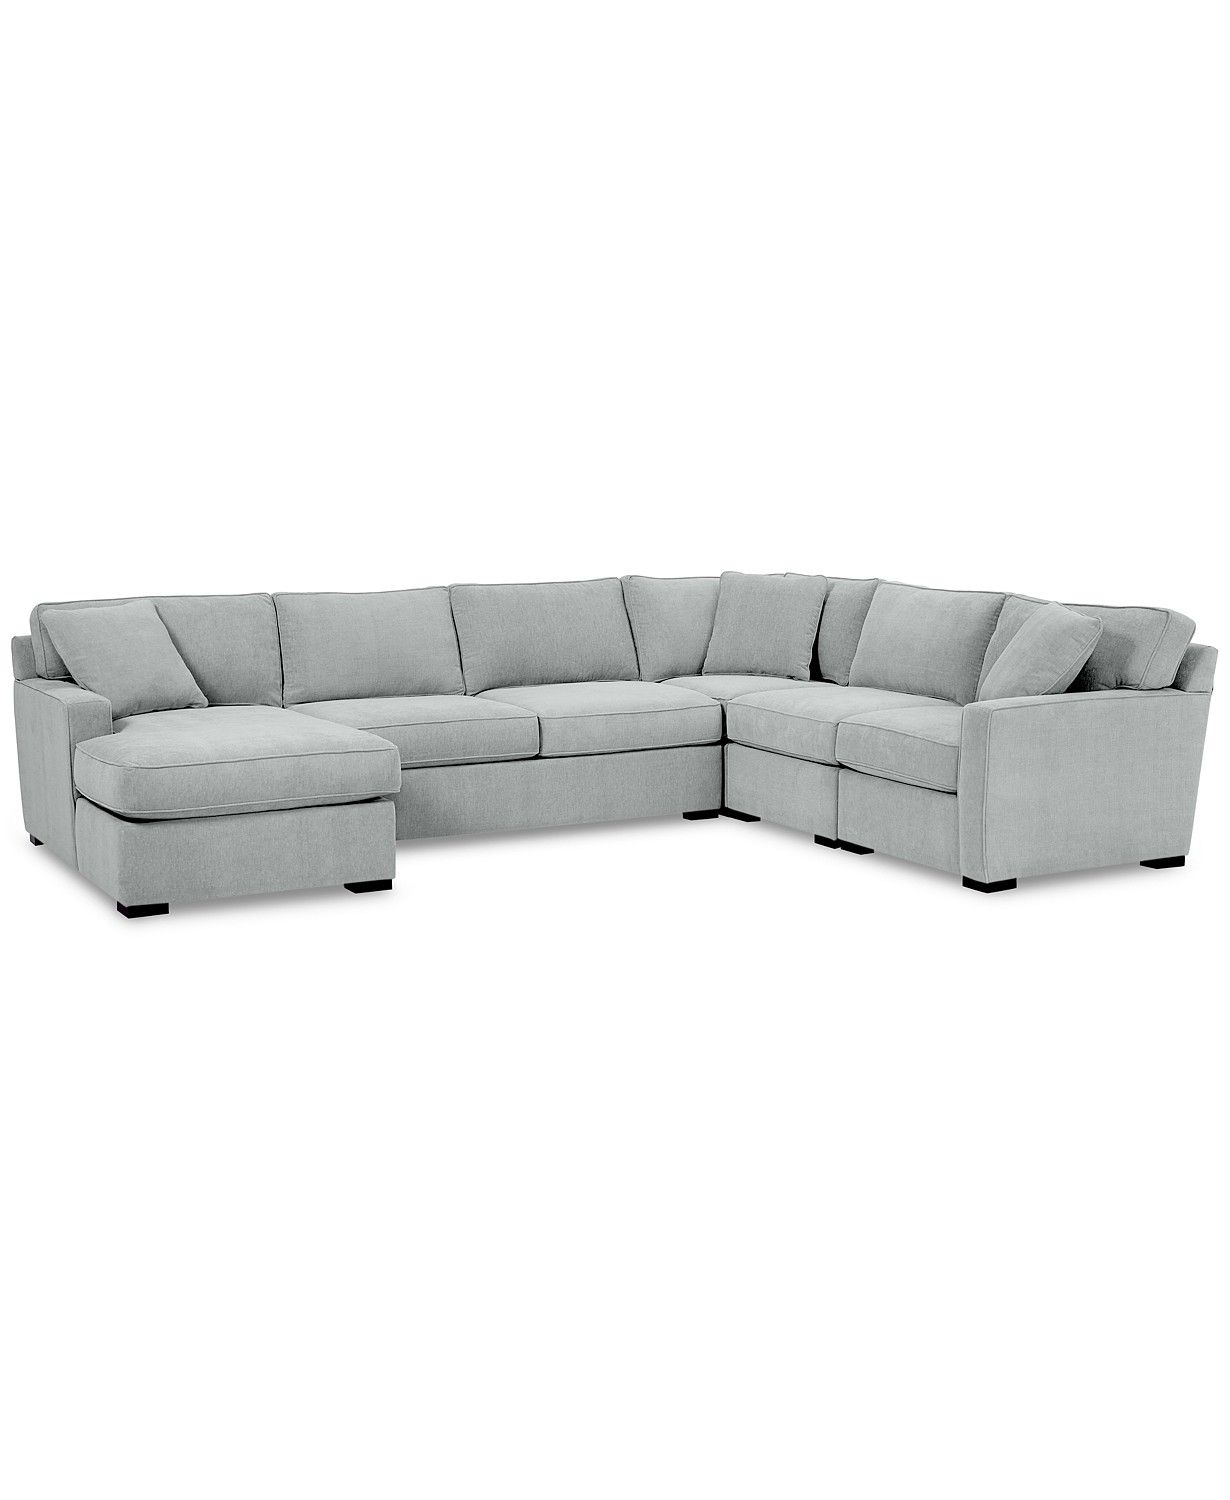 Radley 5-Pc. Fabric Chaise Sectional Sofa with Corner Piece, Created for Macy's | Macys (US)